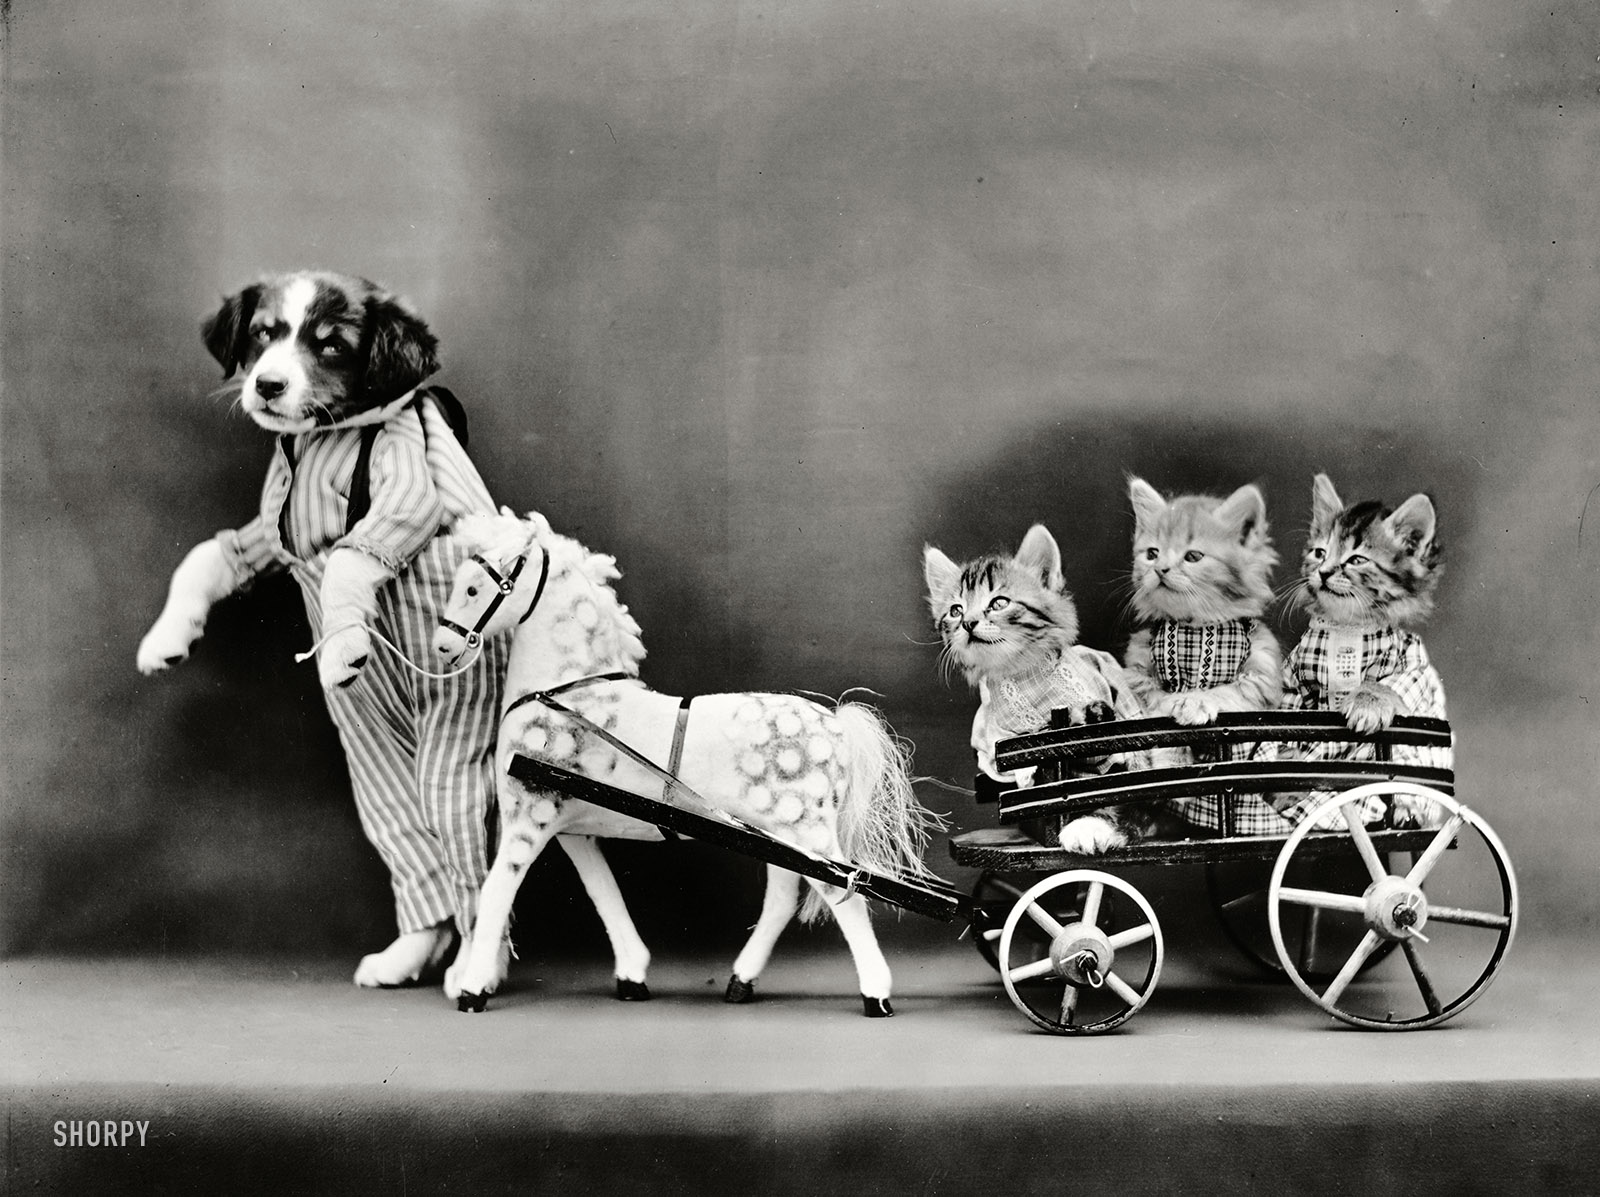 Circa 1914. "Puppy leading pony cart carrying three kittens." So sweet, you could pour this on your pancakes. Photo by Harry W. Frees. View full size.